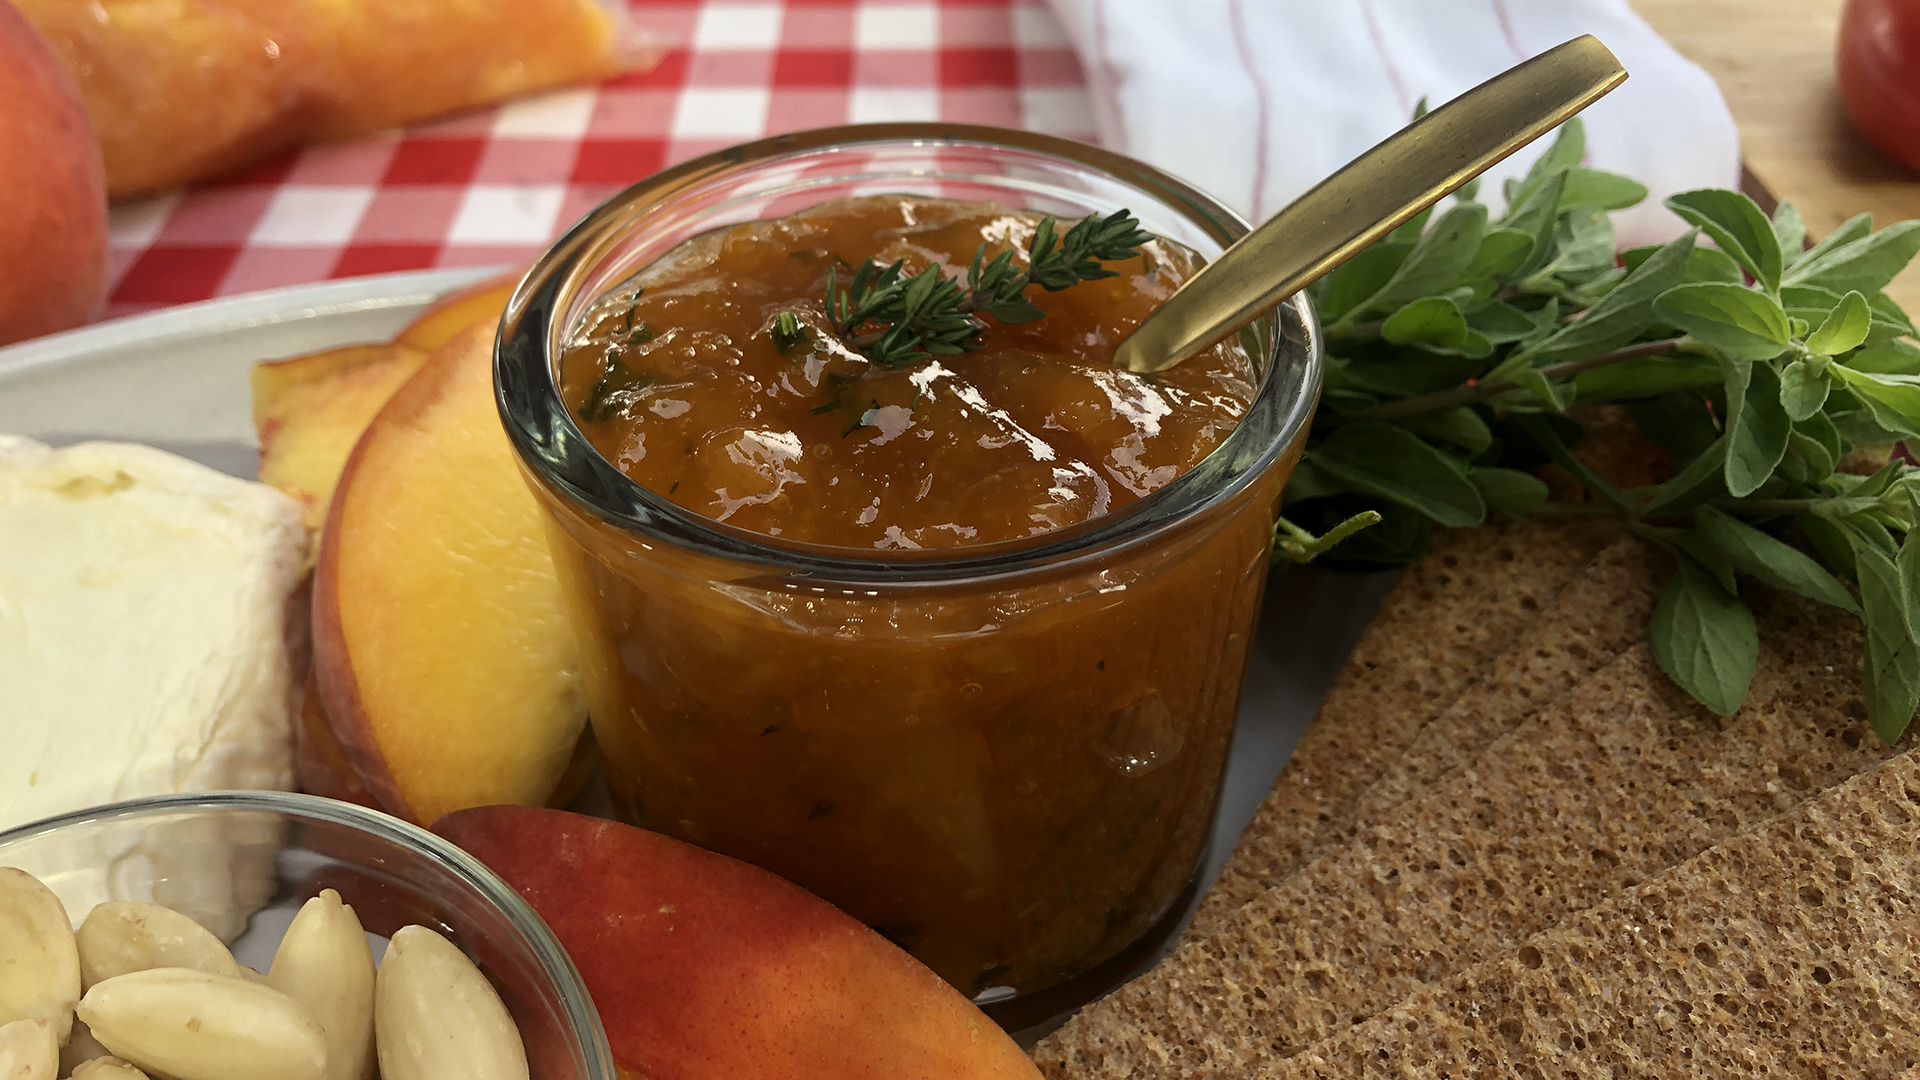 Not-too-sweet peaches and herb jam